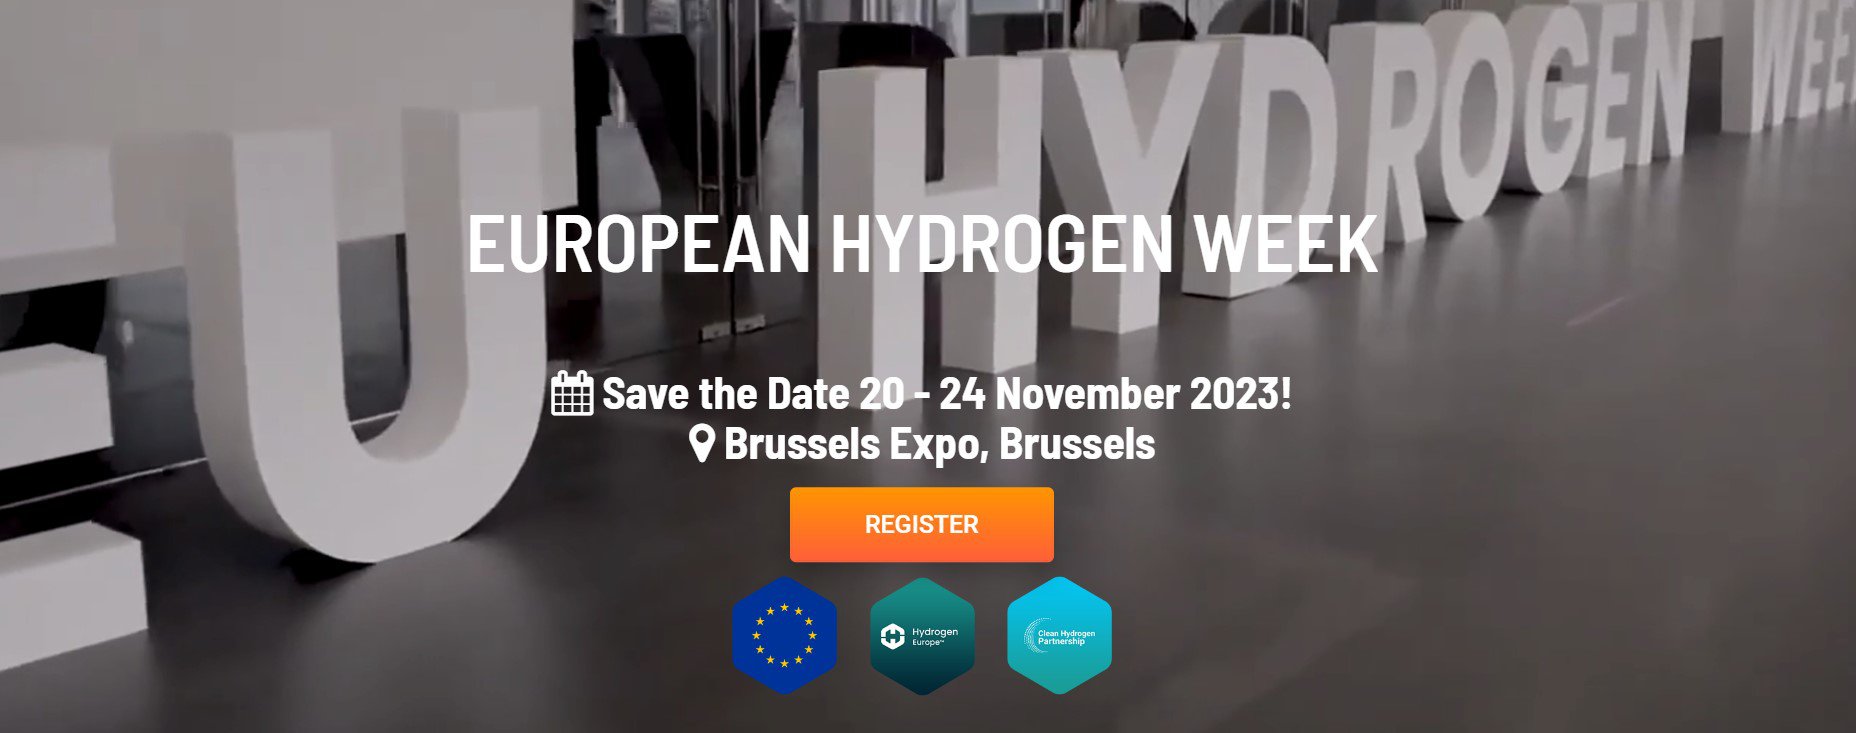 3 Hydrogen Technology Expo Europe